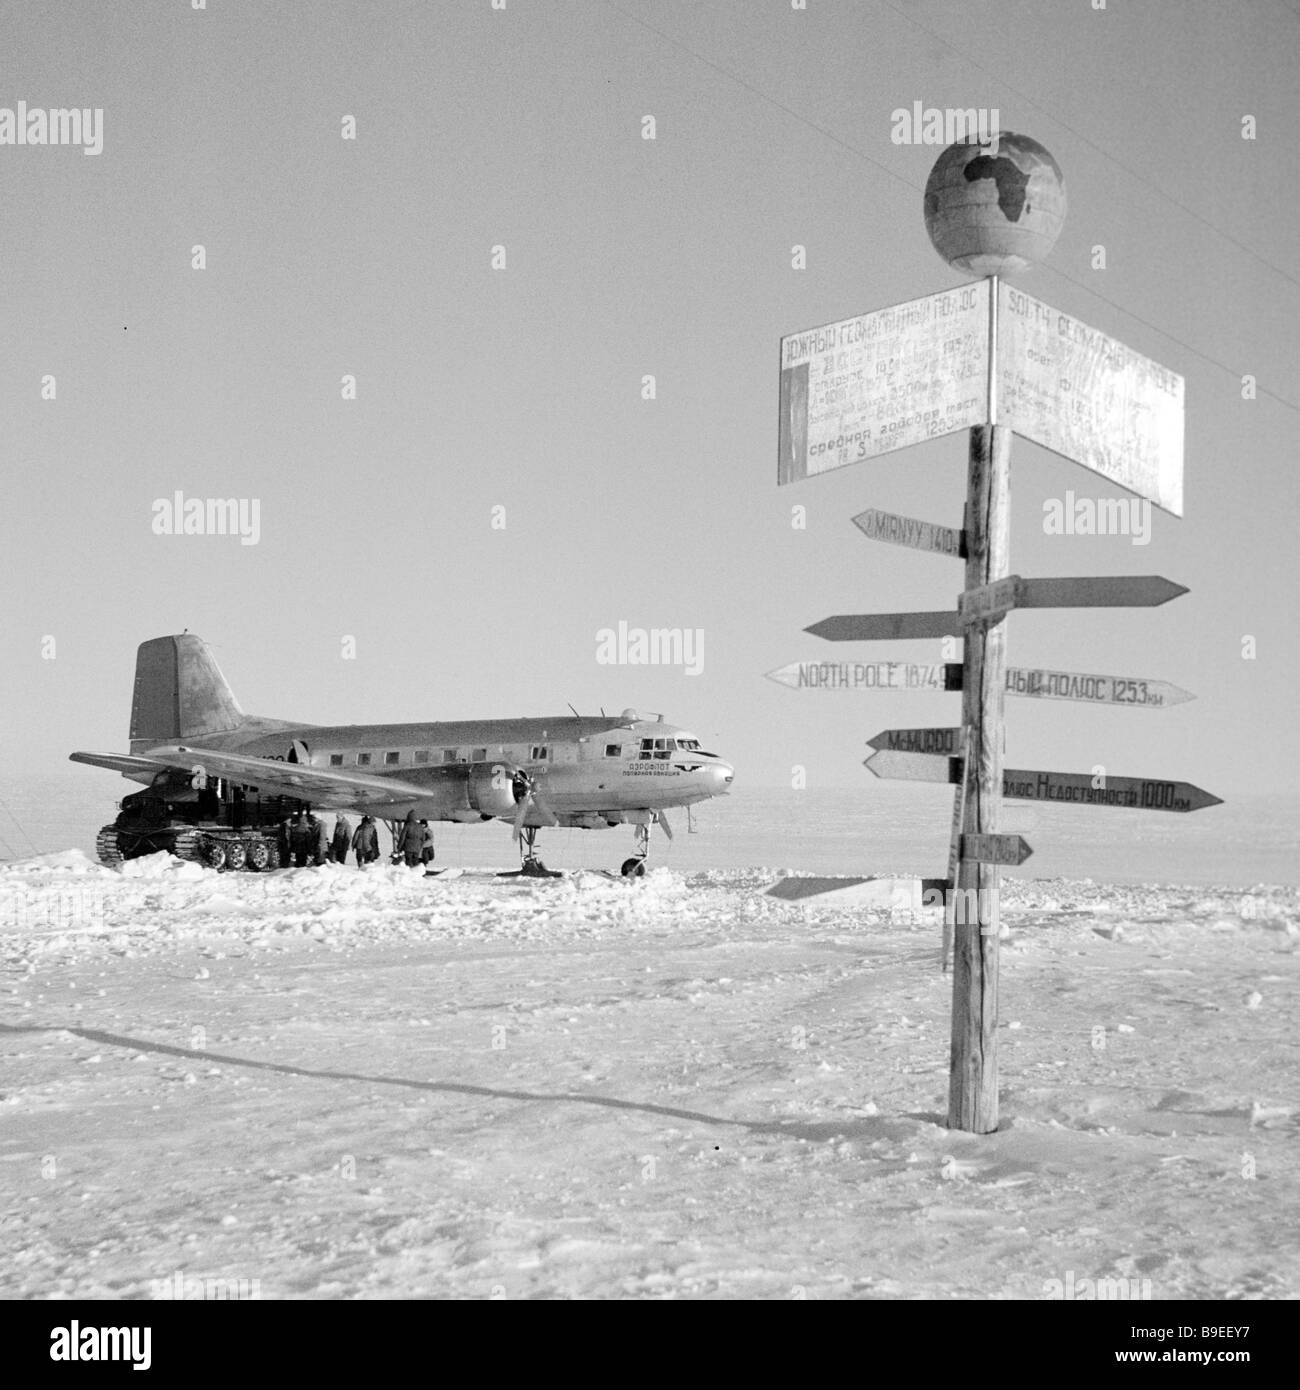 The Vostok Antarctic research station signpost indicates its distance ...